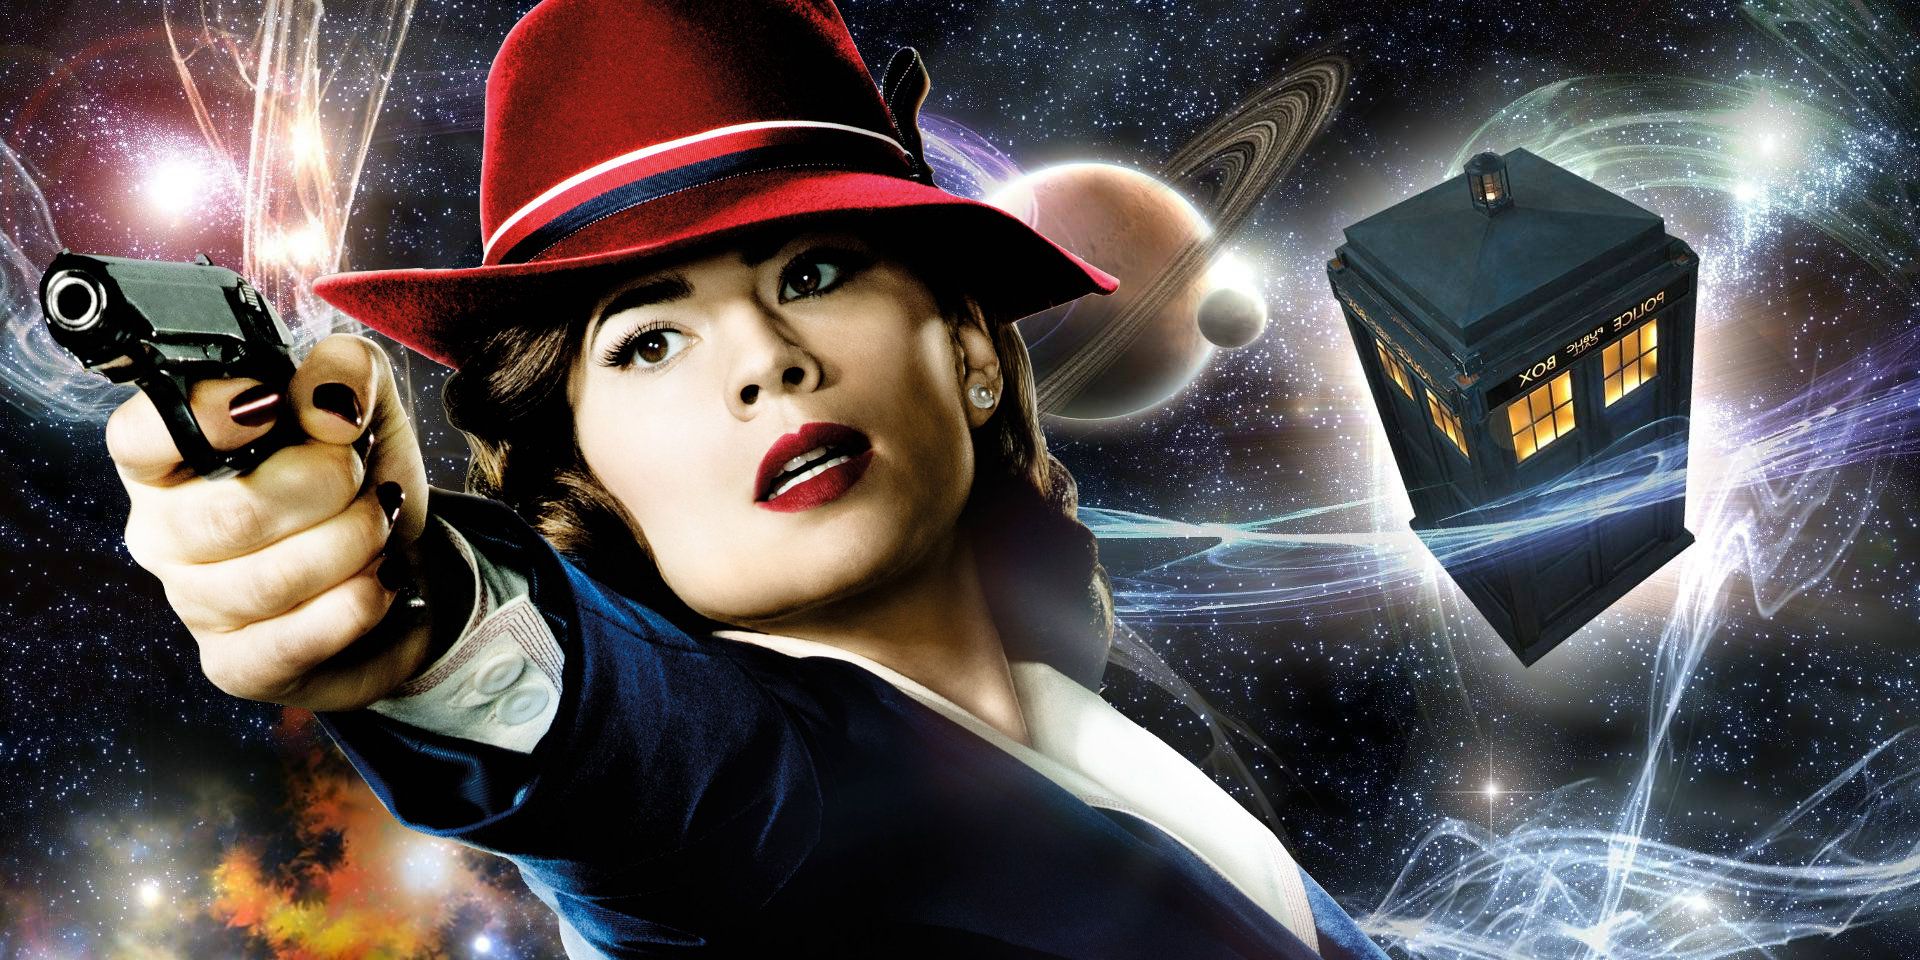 Agent Carter's Hayley Atwell and Doctor Who